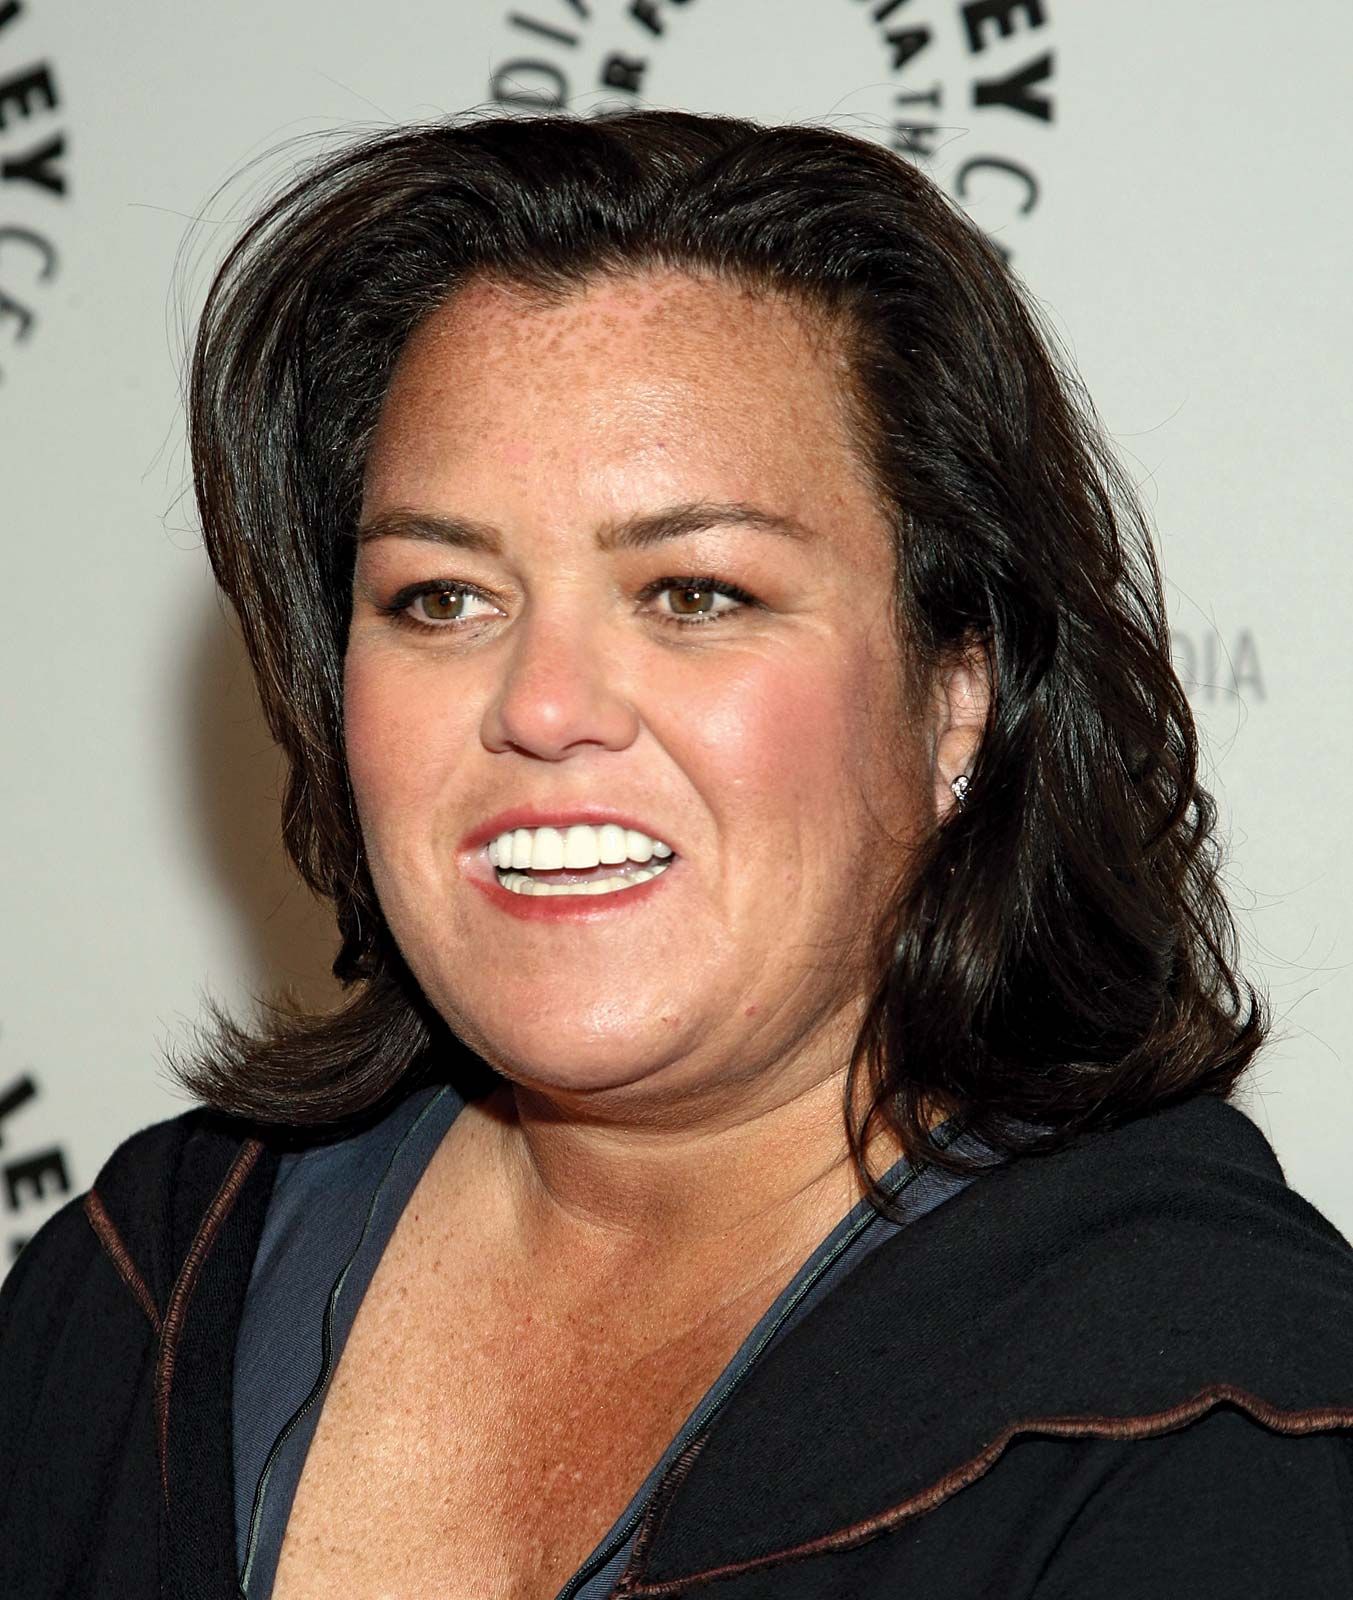 taille-rosie-o-donnell-Image